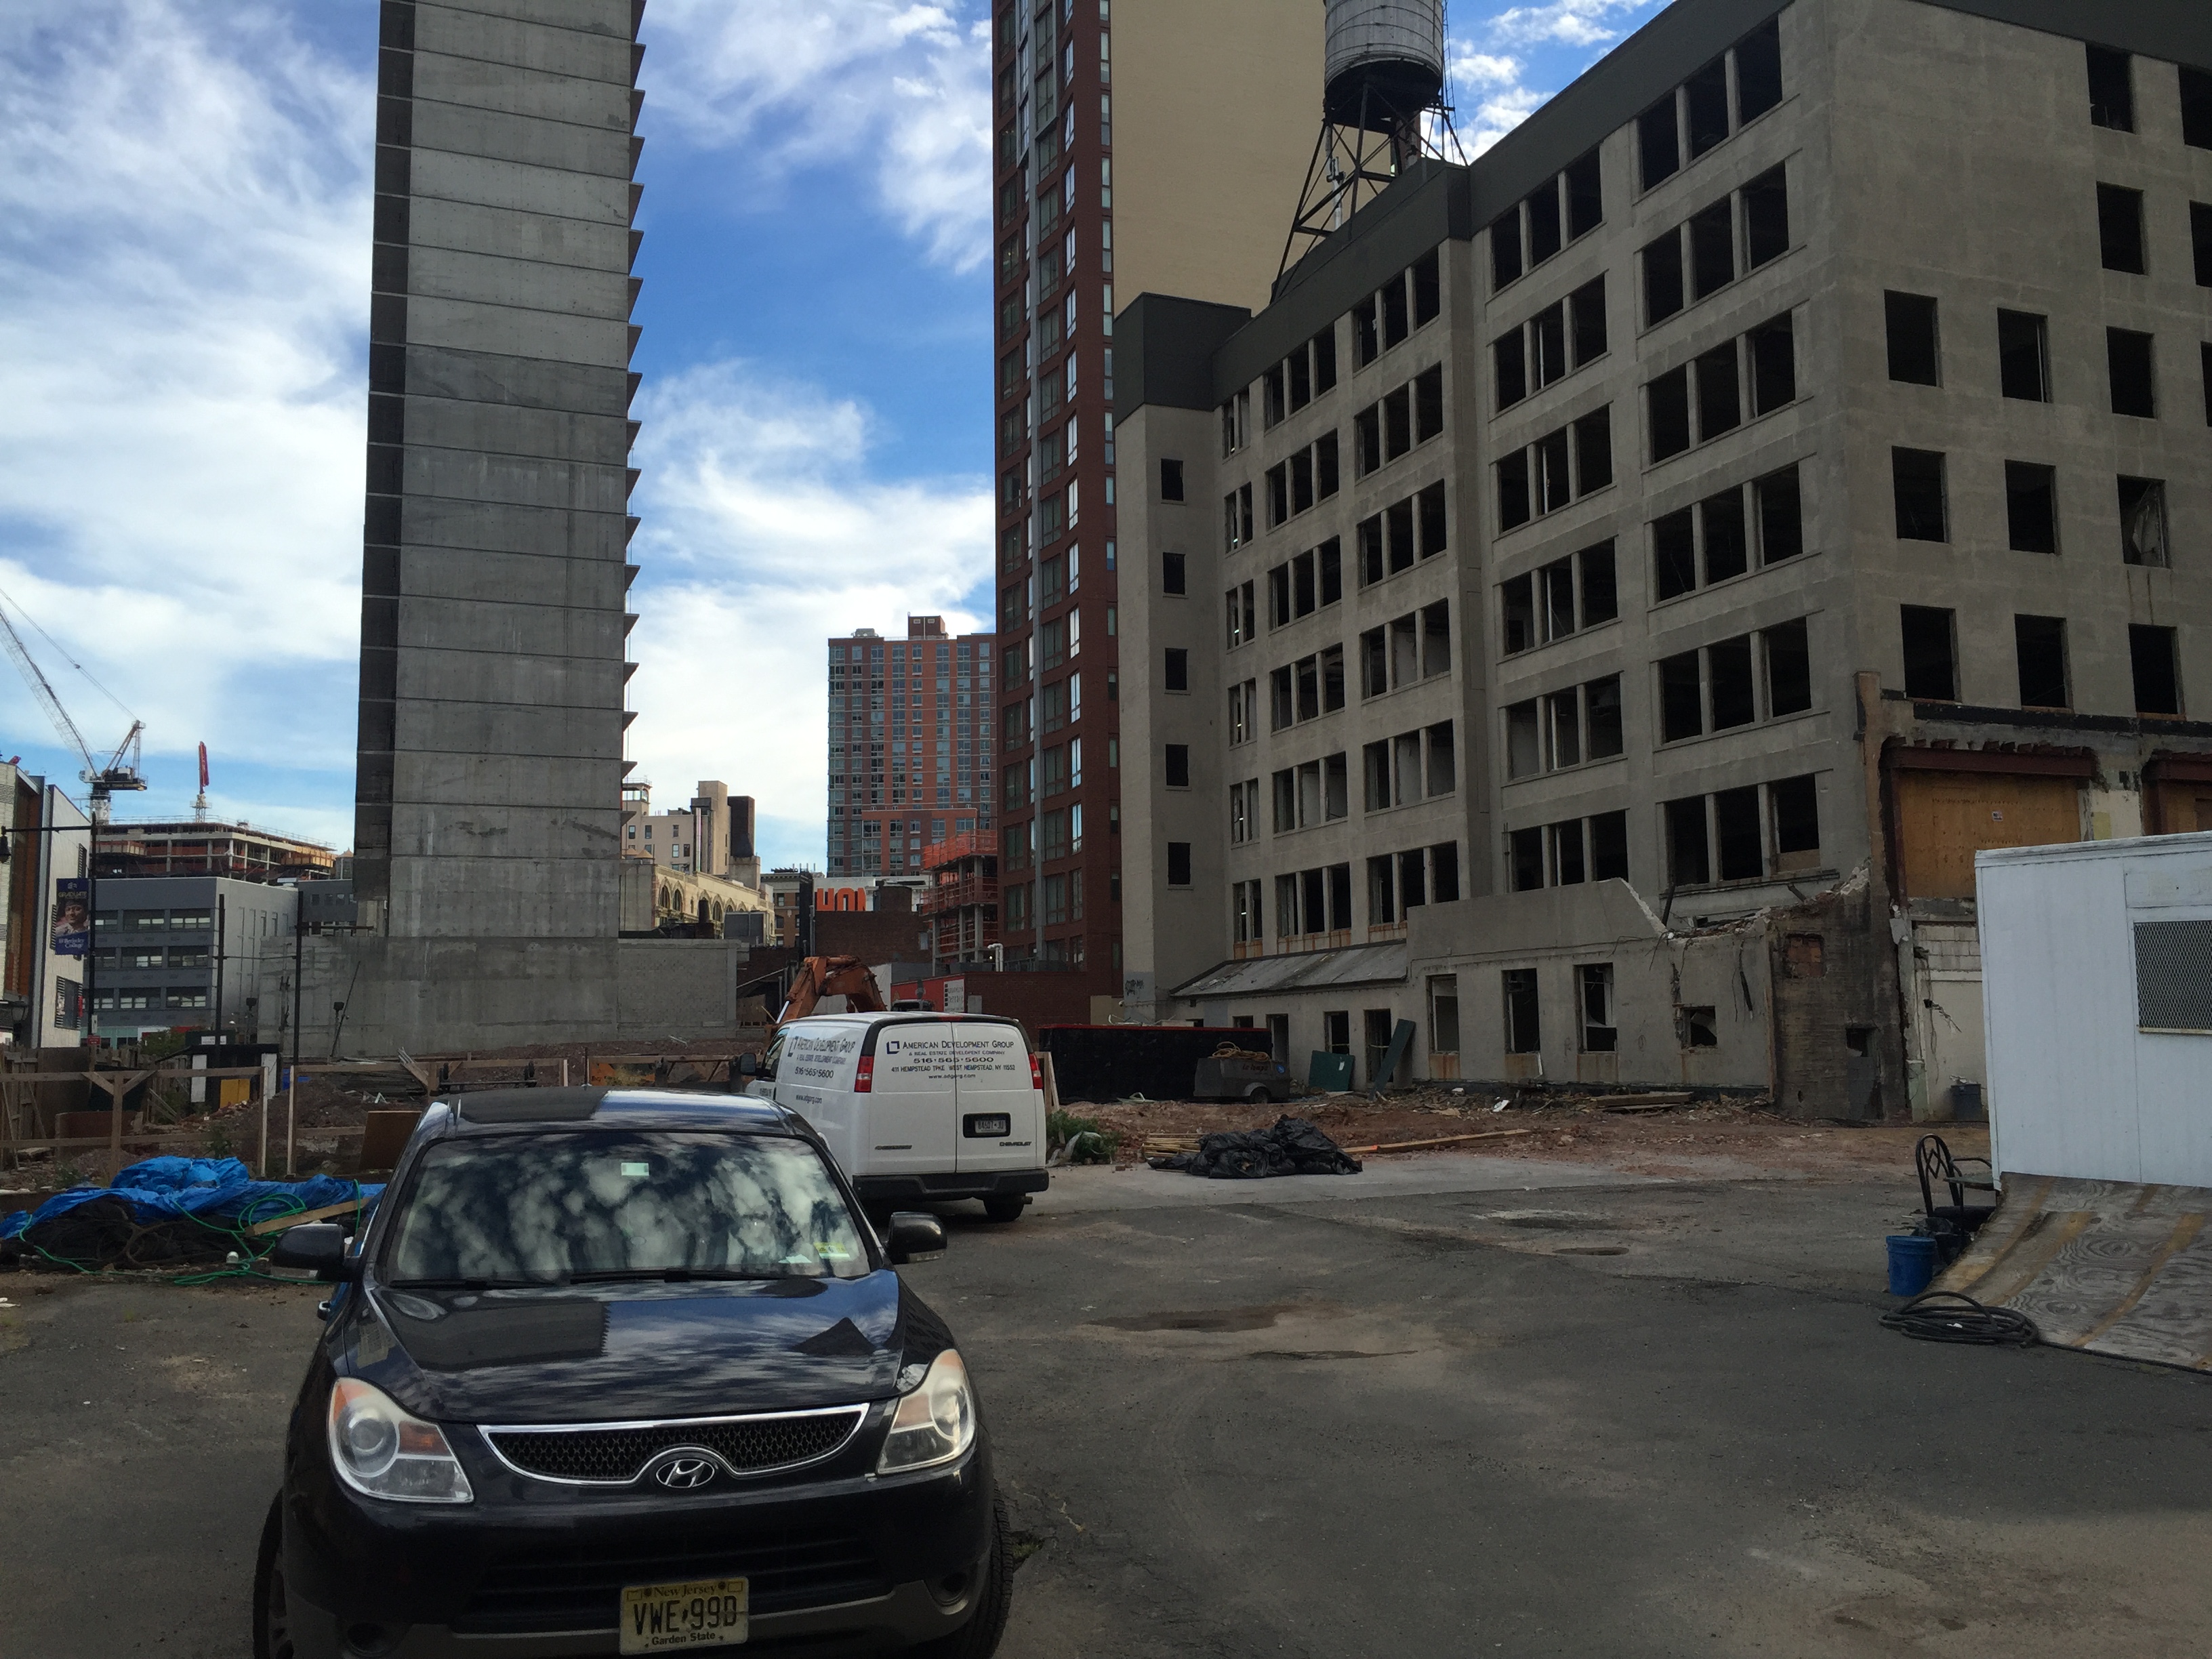 The future Willoughby Square site on Albee Square/Gold Street